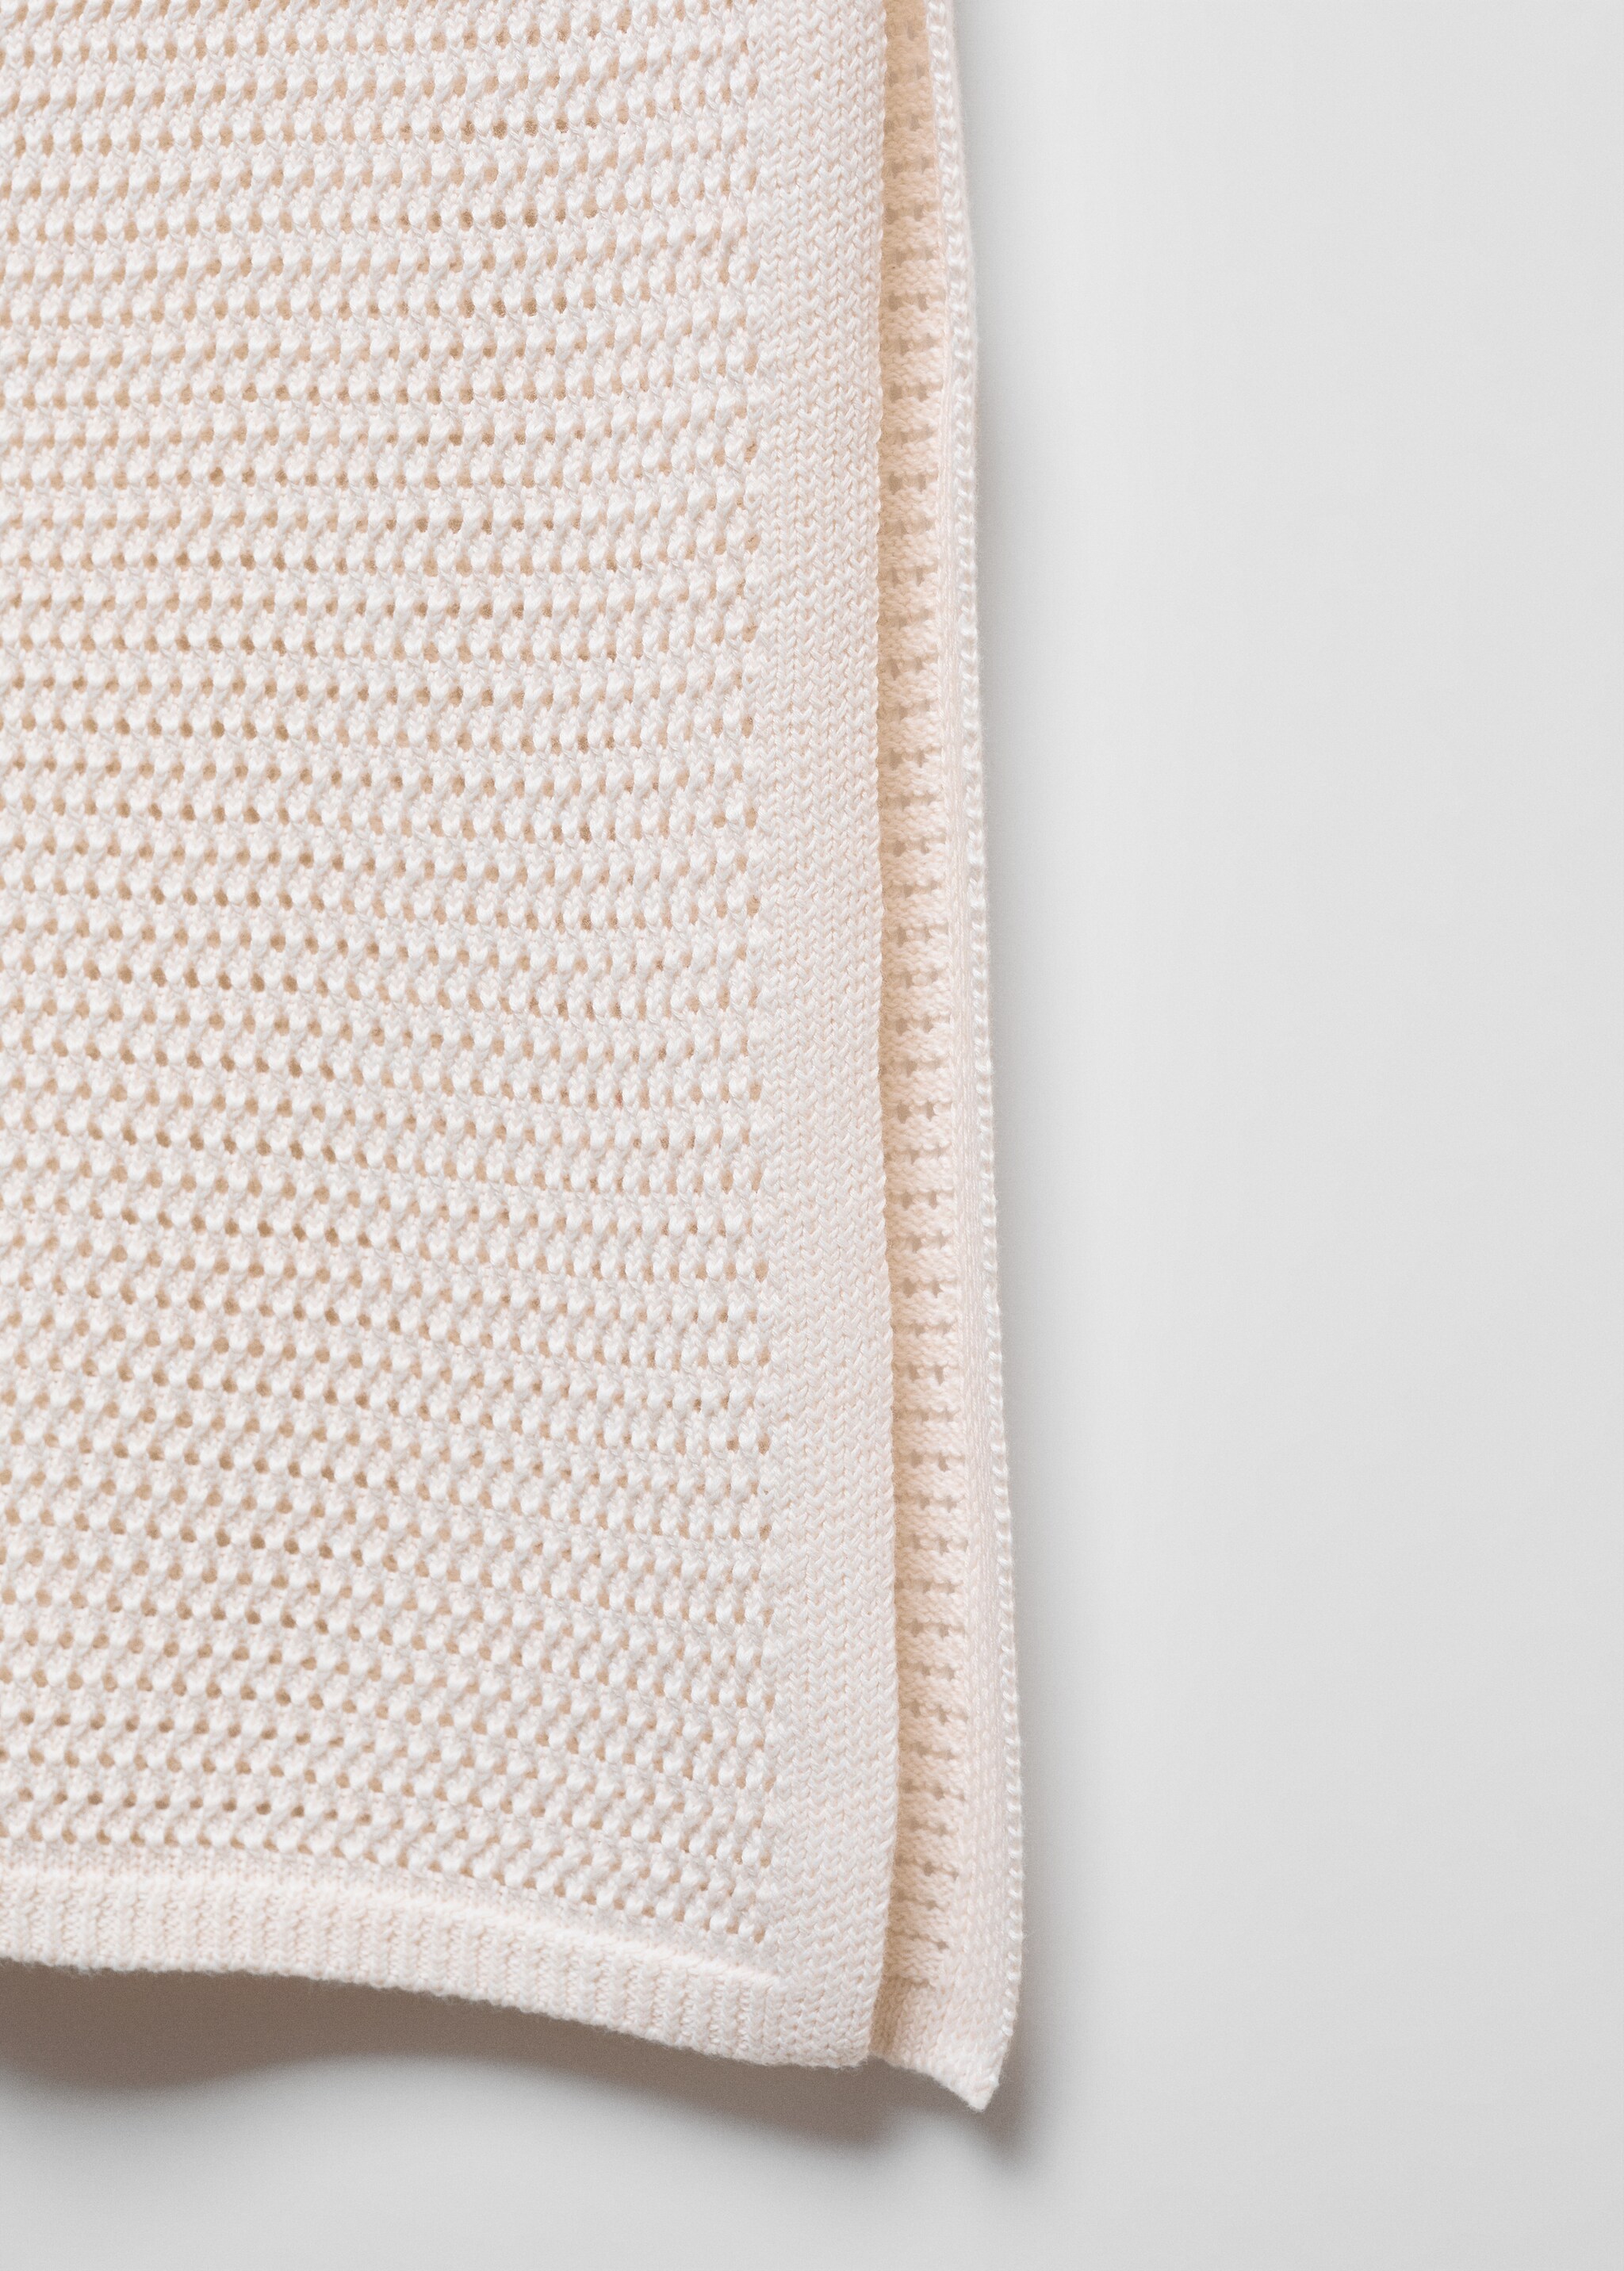 Openwork knitted skirt - Details of the article 8